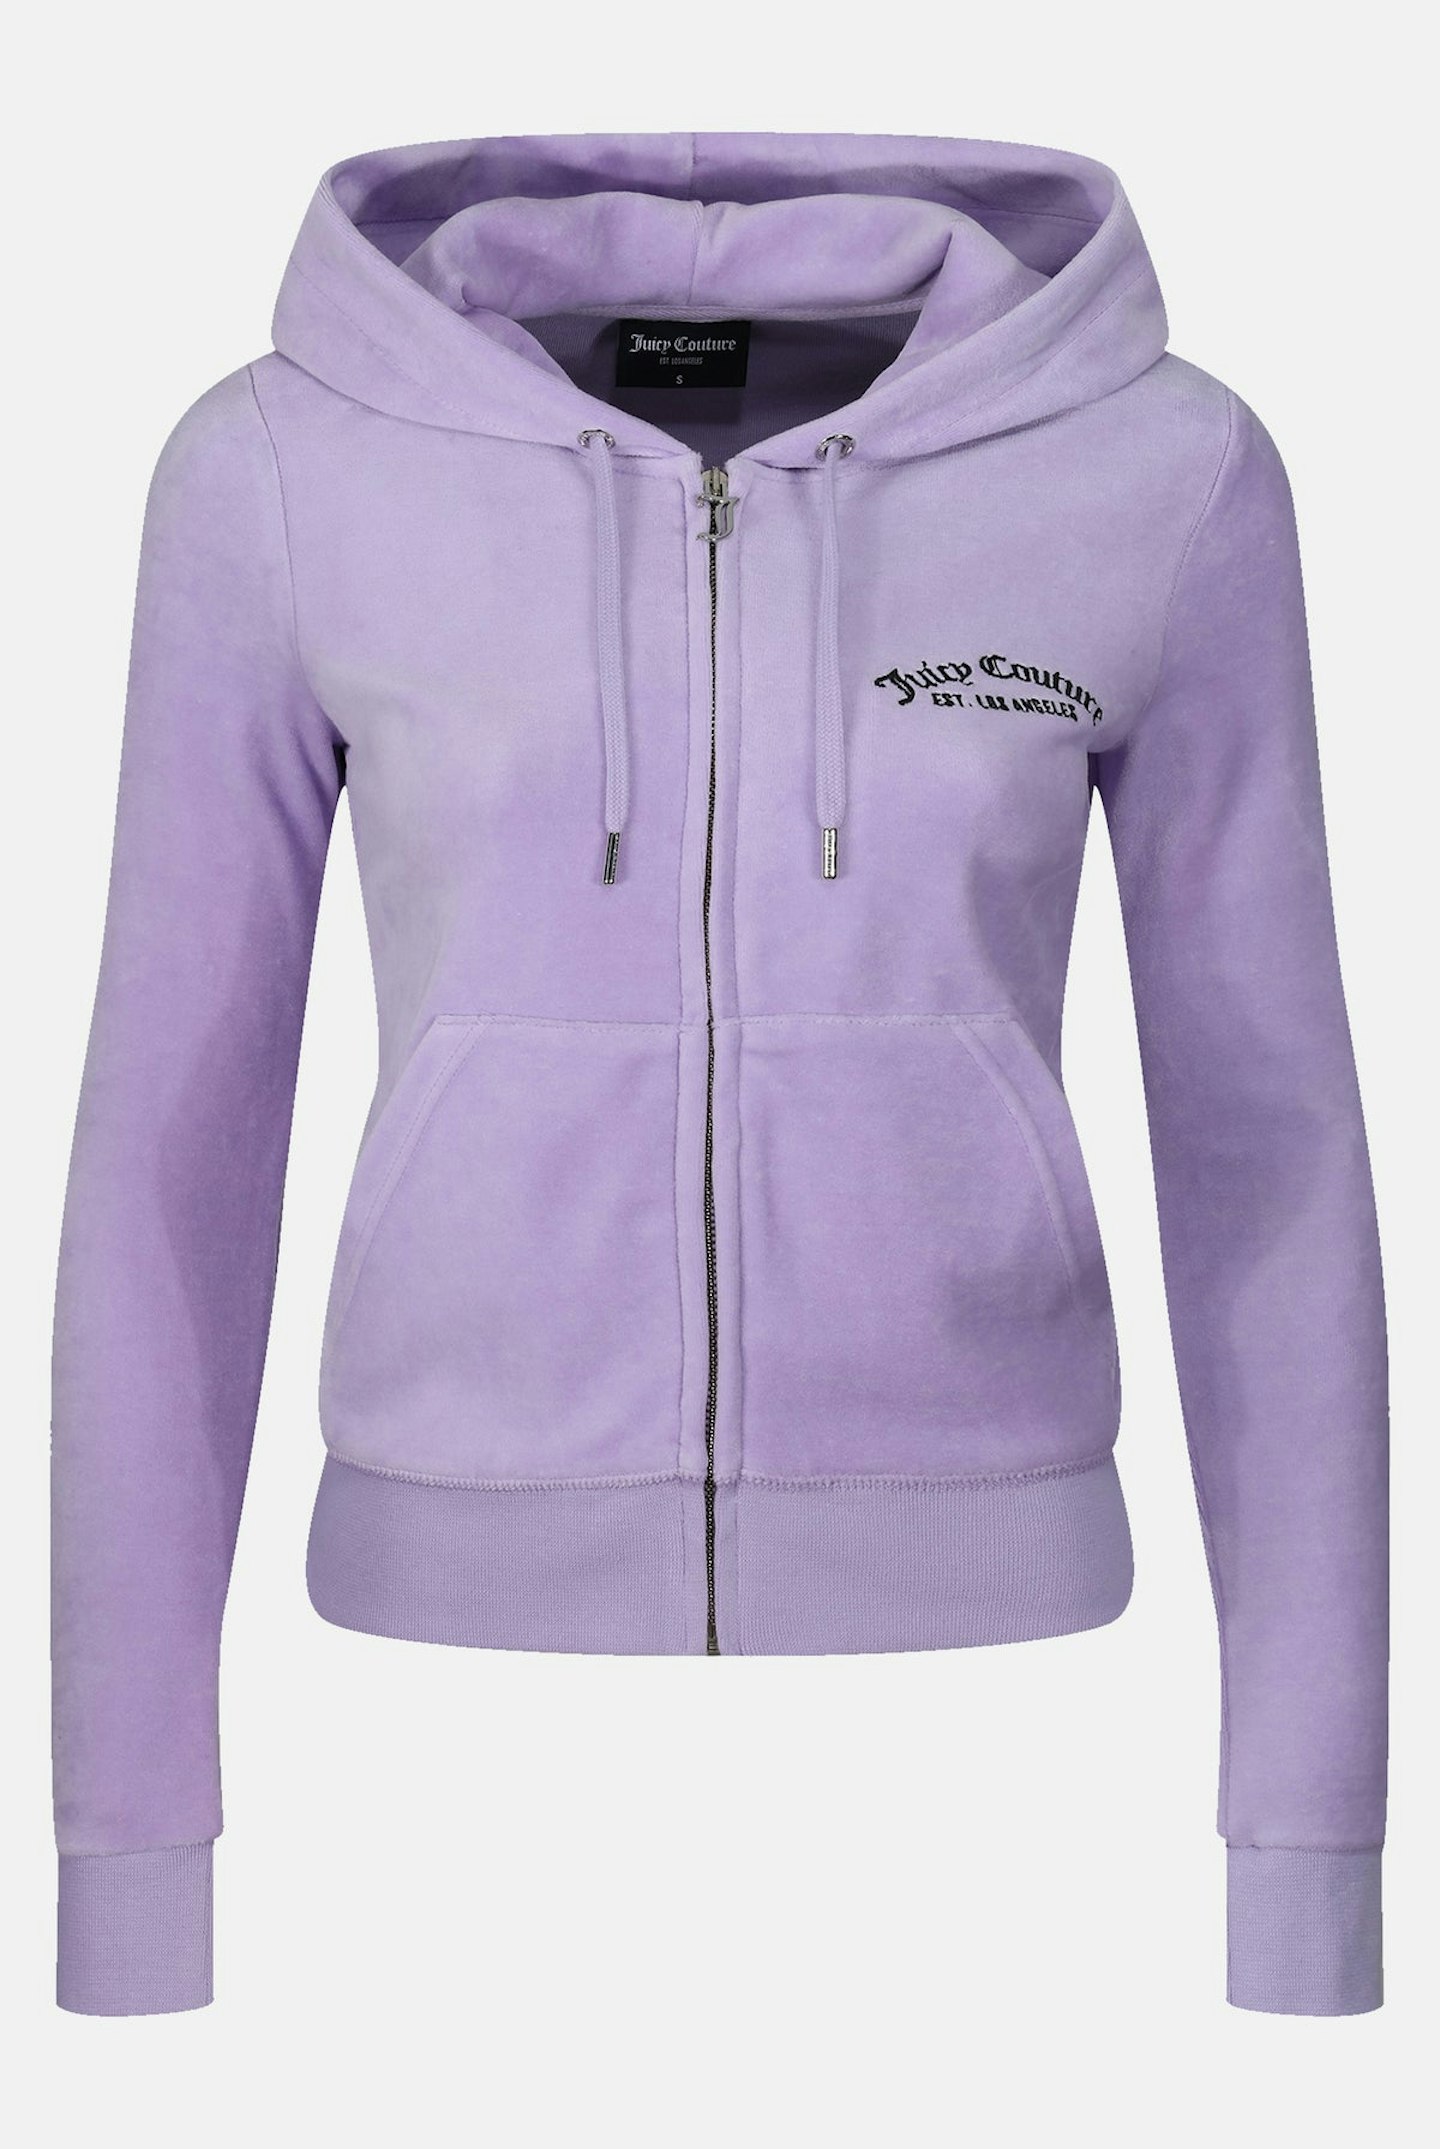 Juicy Couture, Pastel Lilac Recycled Velour Zip-Through Hoodie